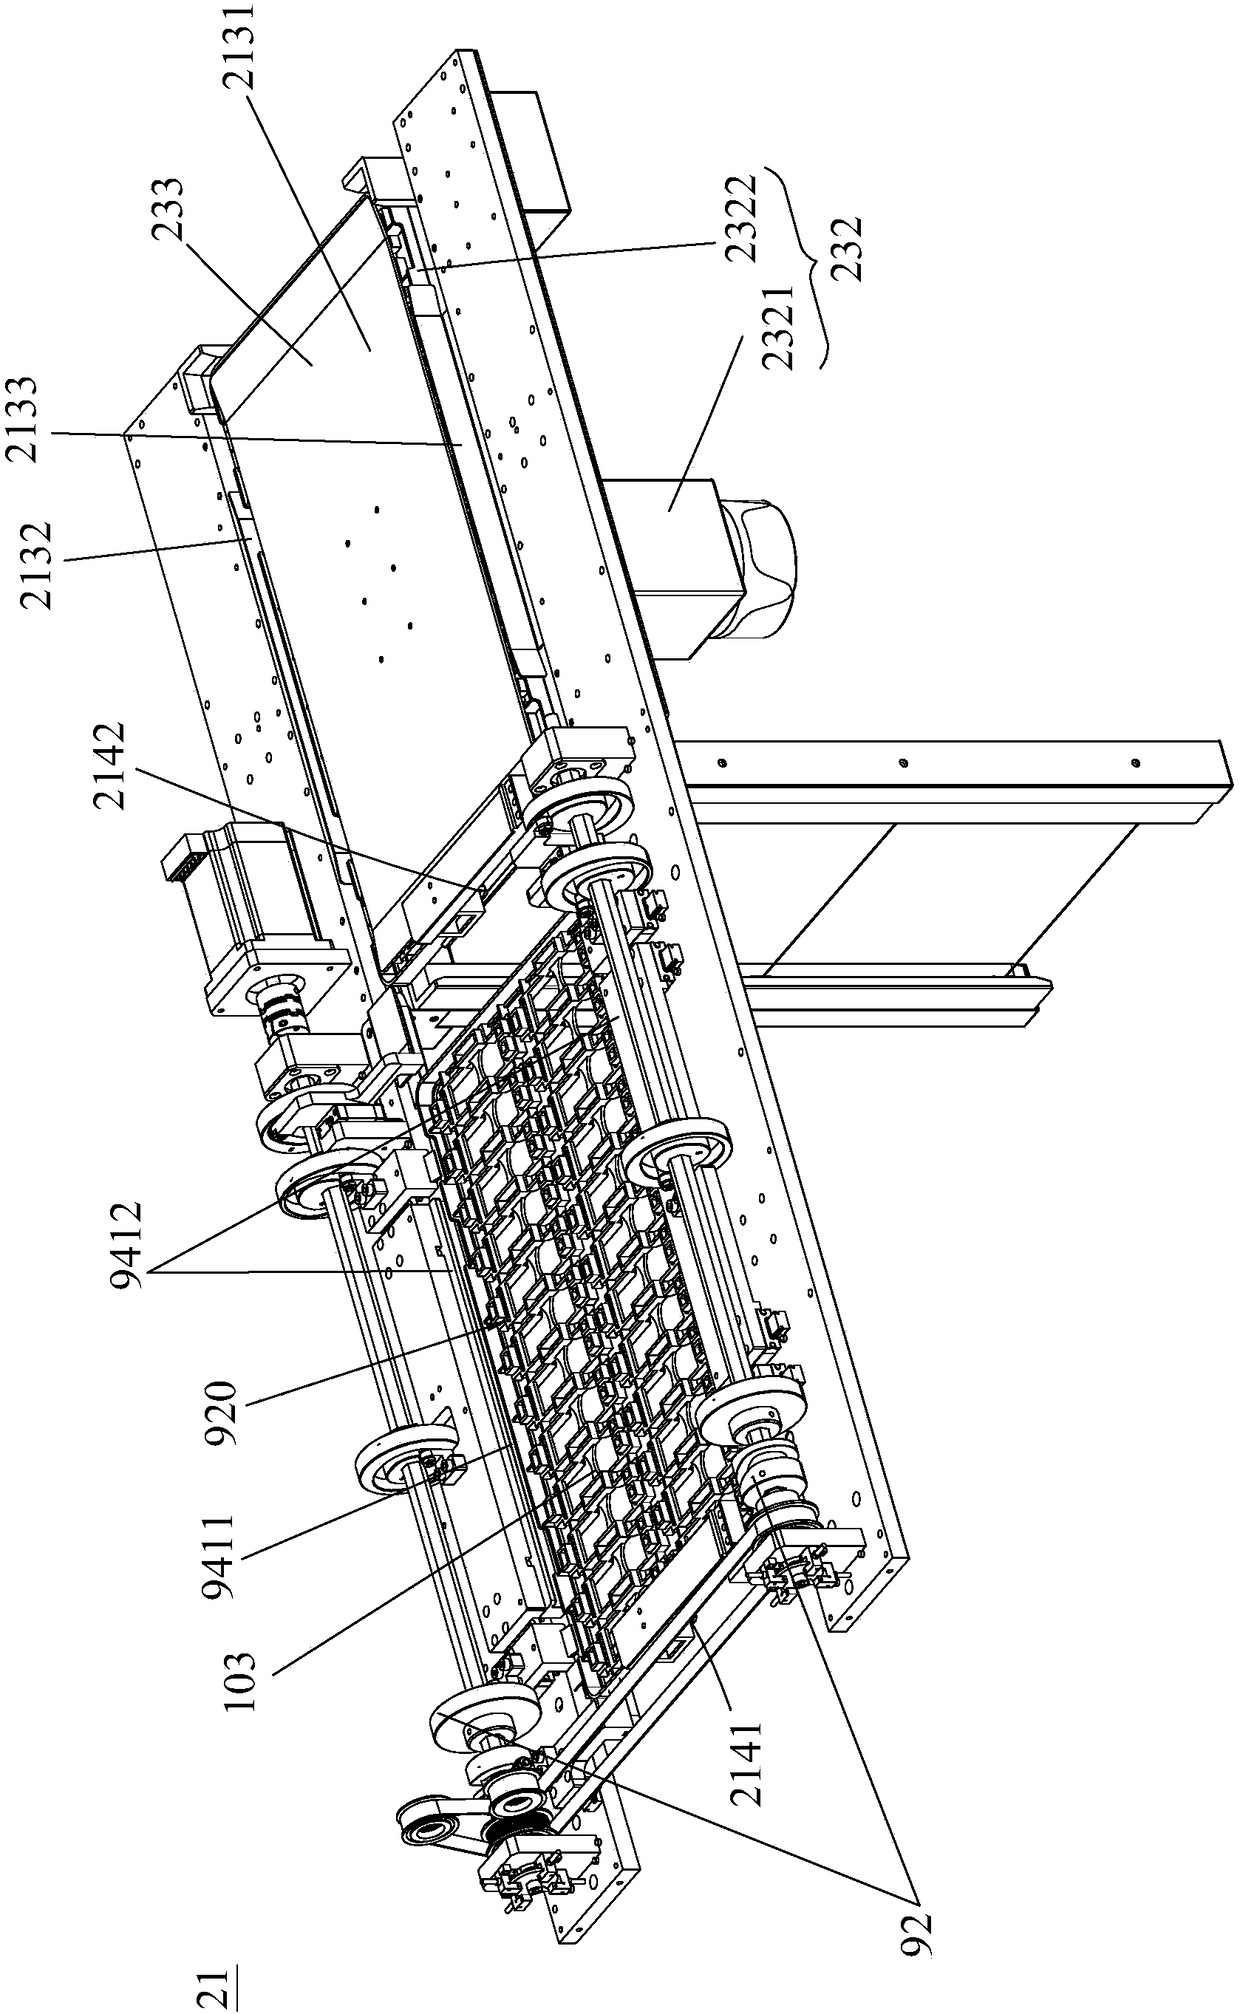 Disk body separation mechanism and feeding device